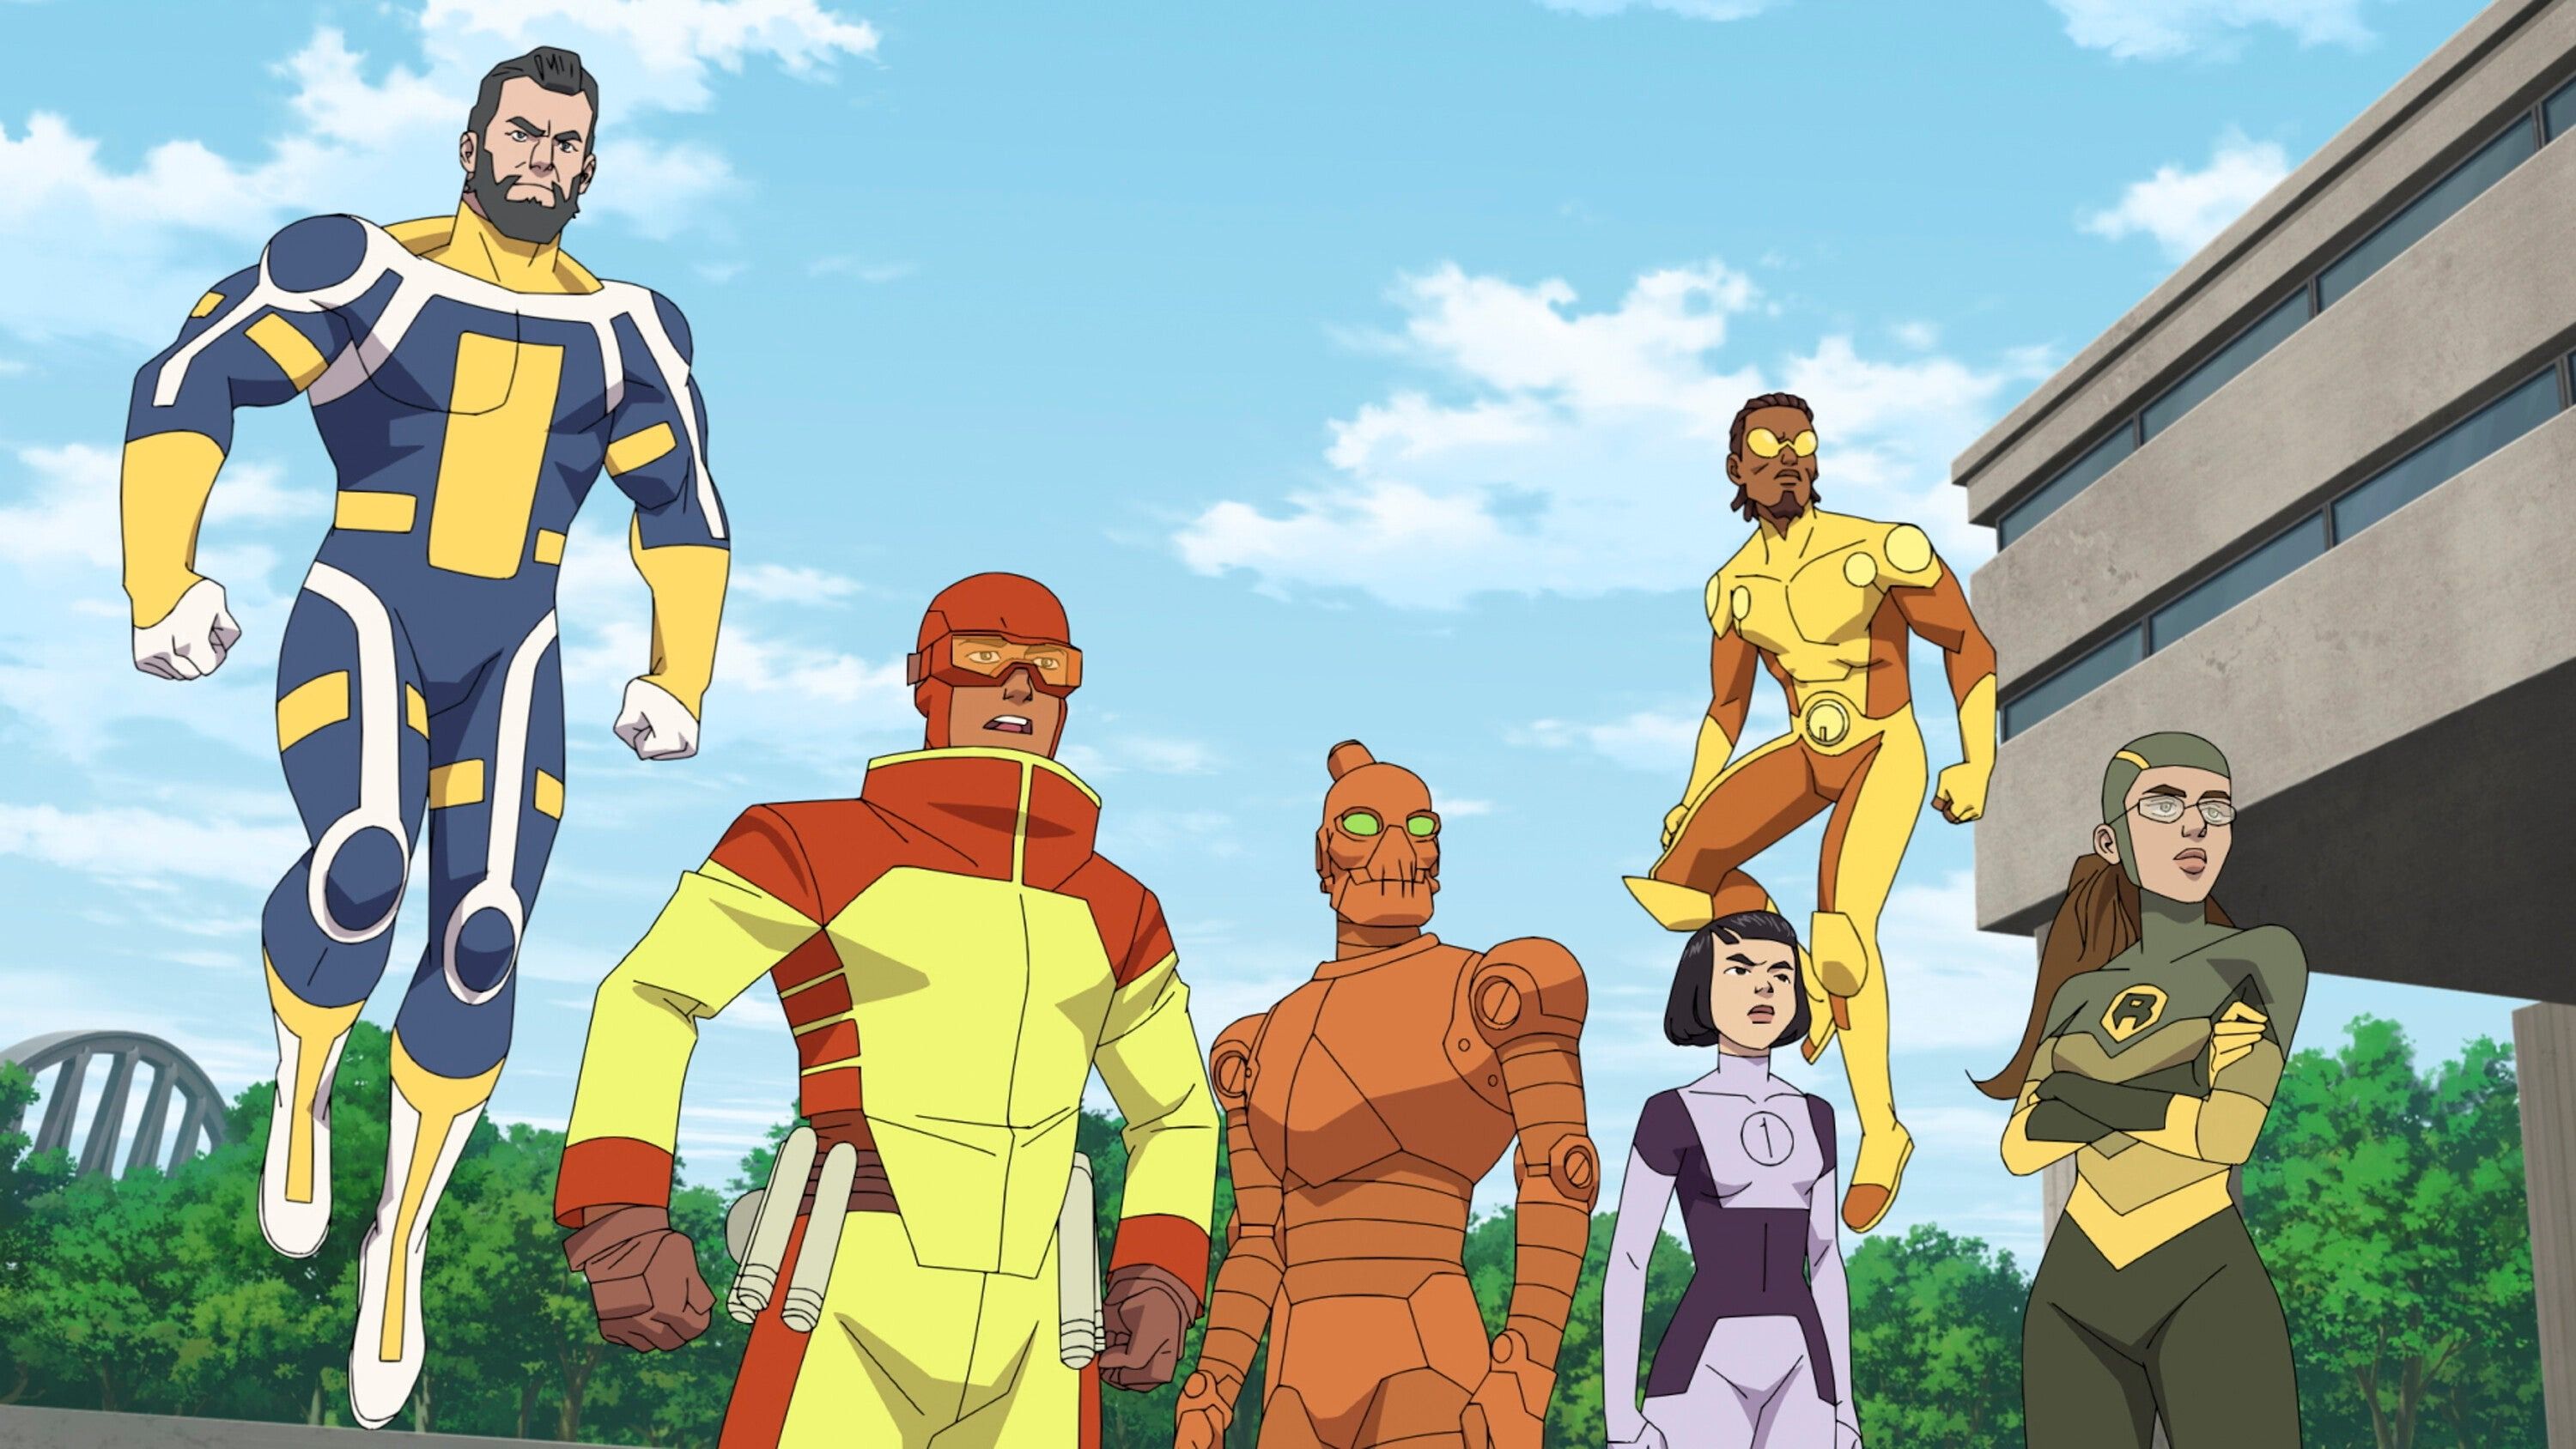 Invincible Season 2 Just Set the Series' Endgame in Motion Already